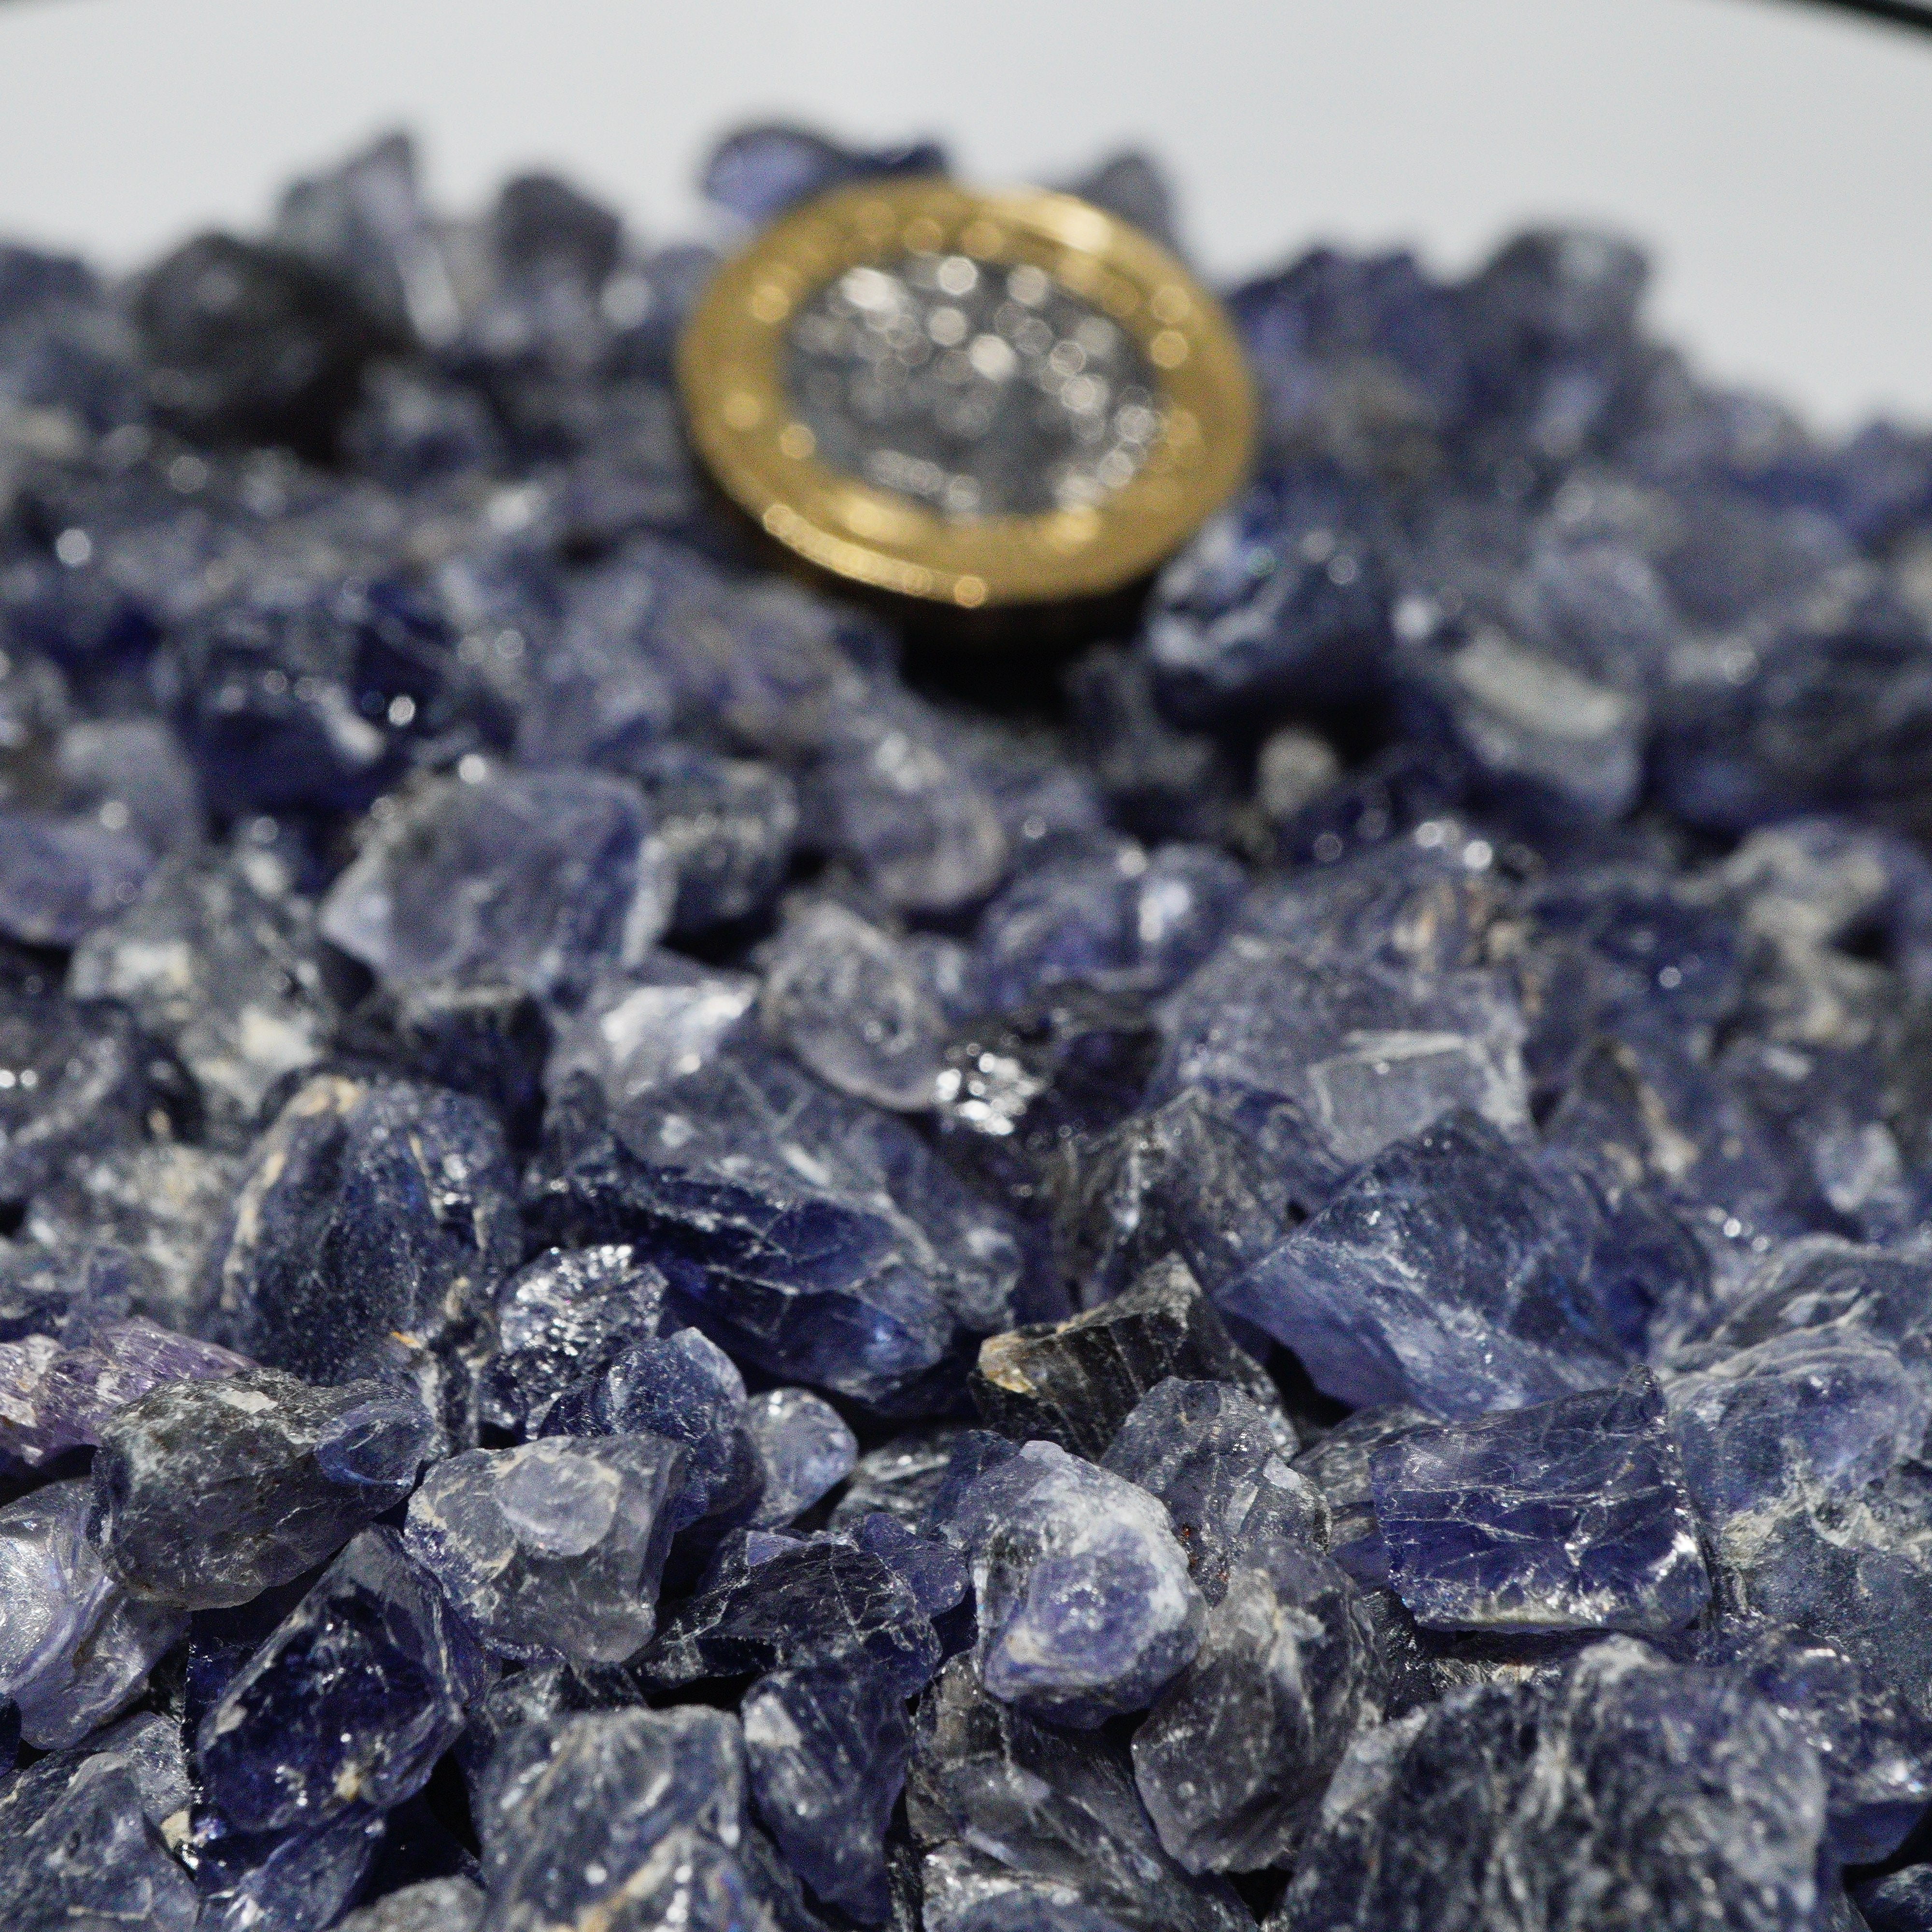 5049Gm {5Kg} Wholesale Lot Iolite From Tanzania 0.20Gm-2.00Gm Some Crystals Too..